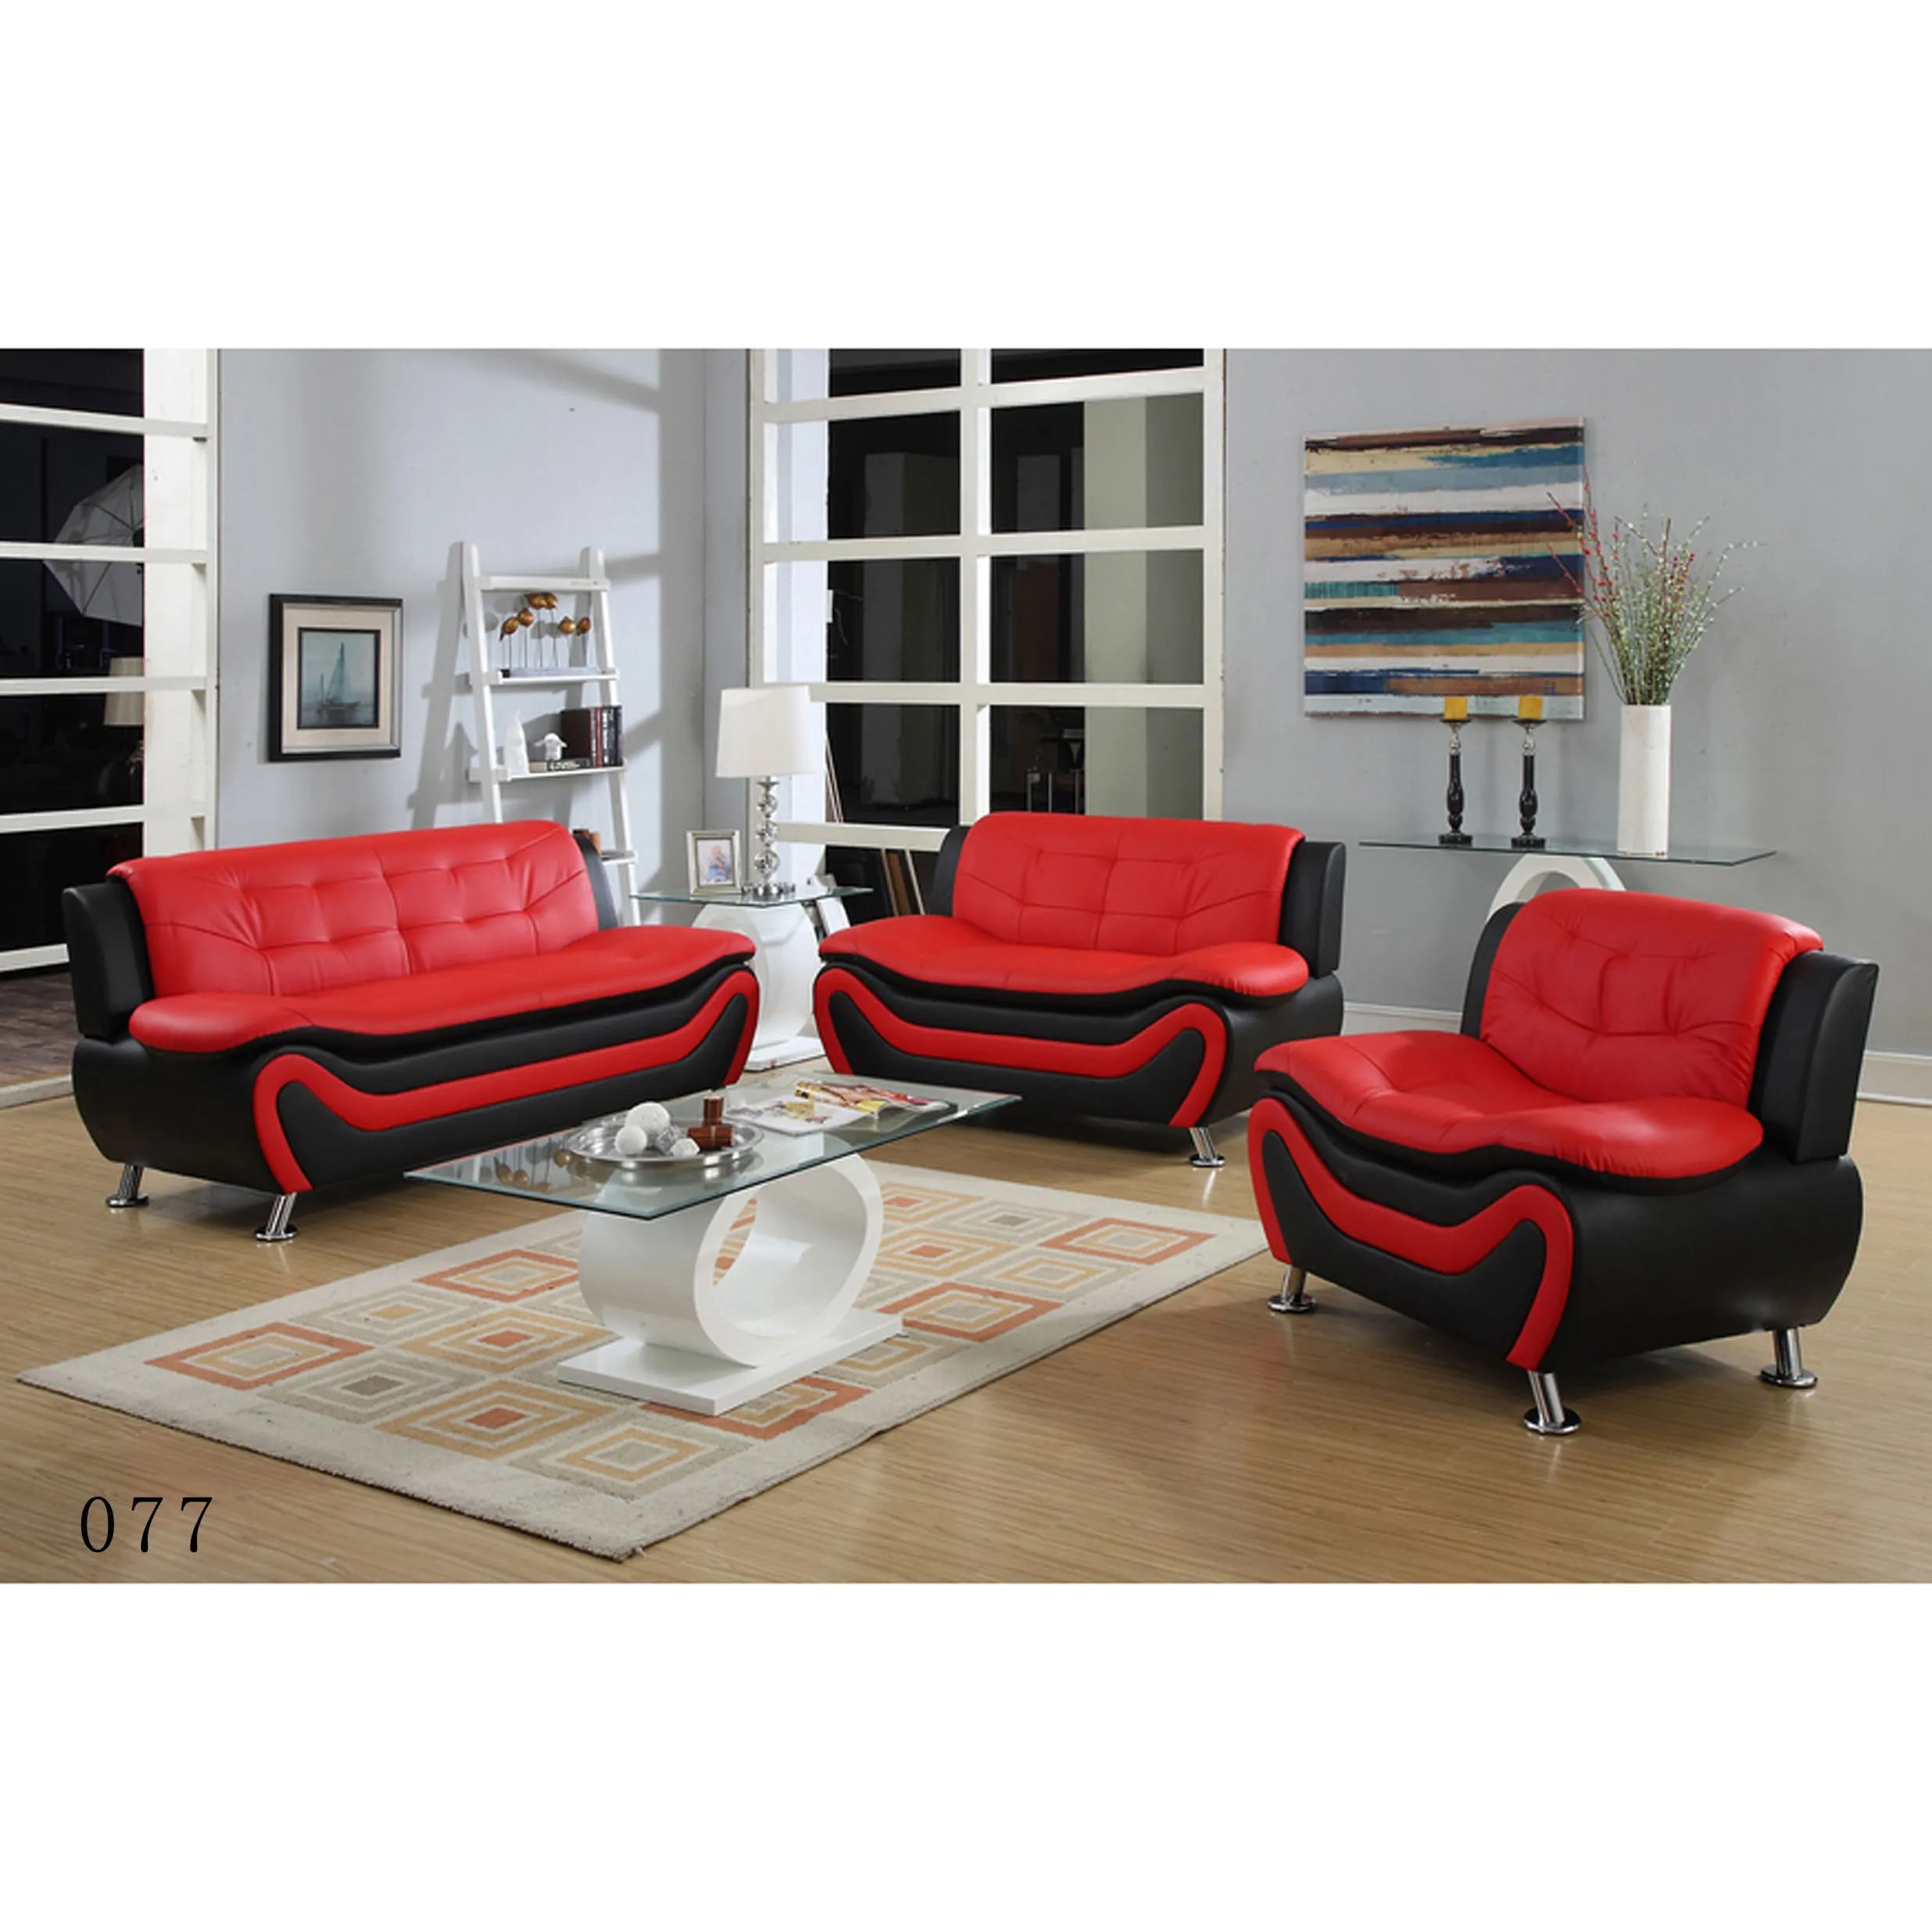 3 Piece Faux Leather Contemporary Living Room Sofa Loveseat, Chair Set 2 Tone Black White